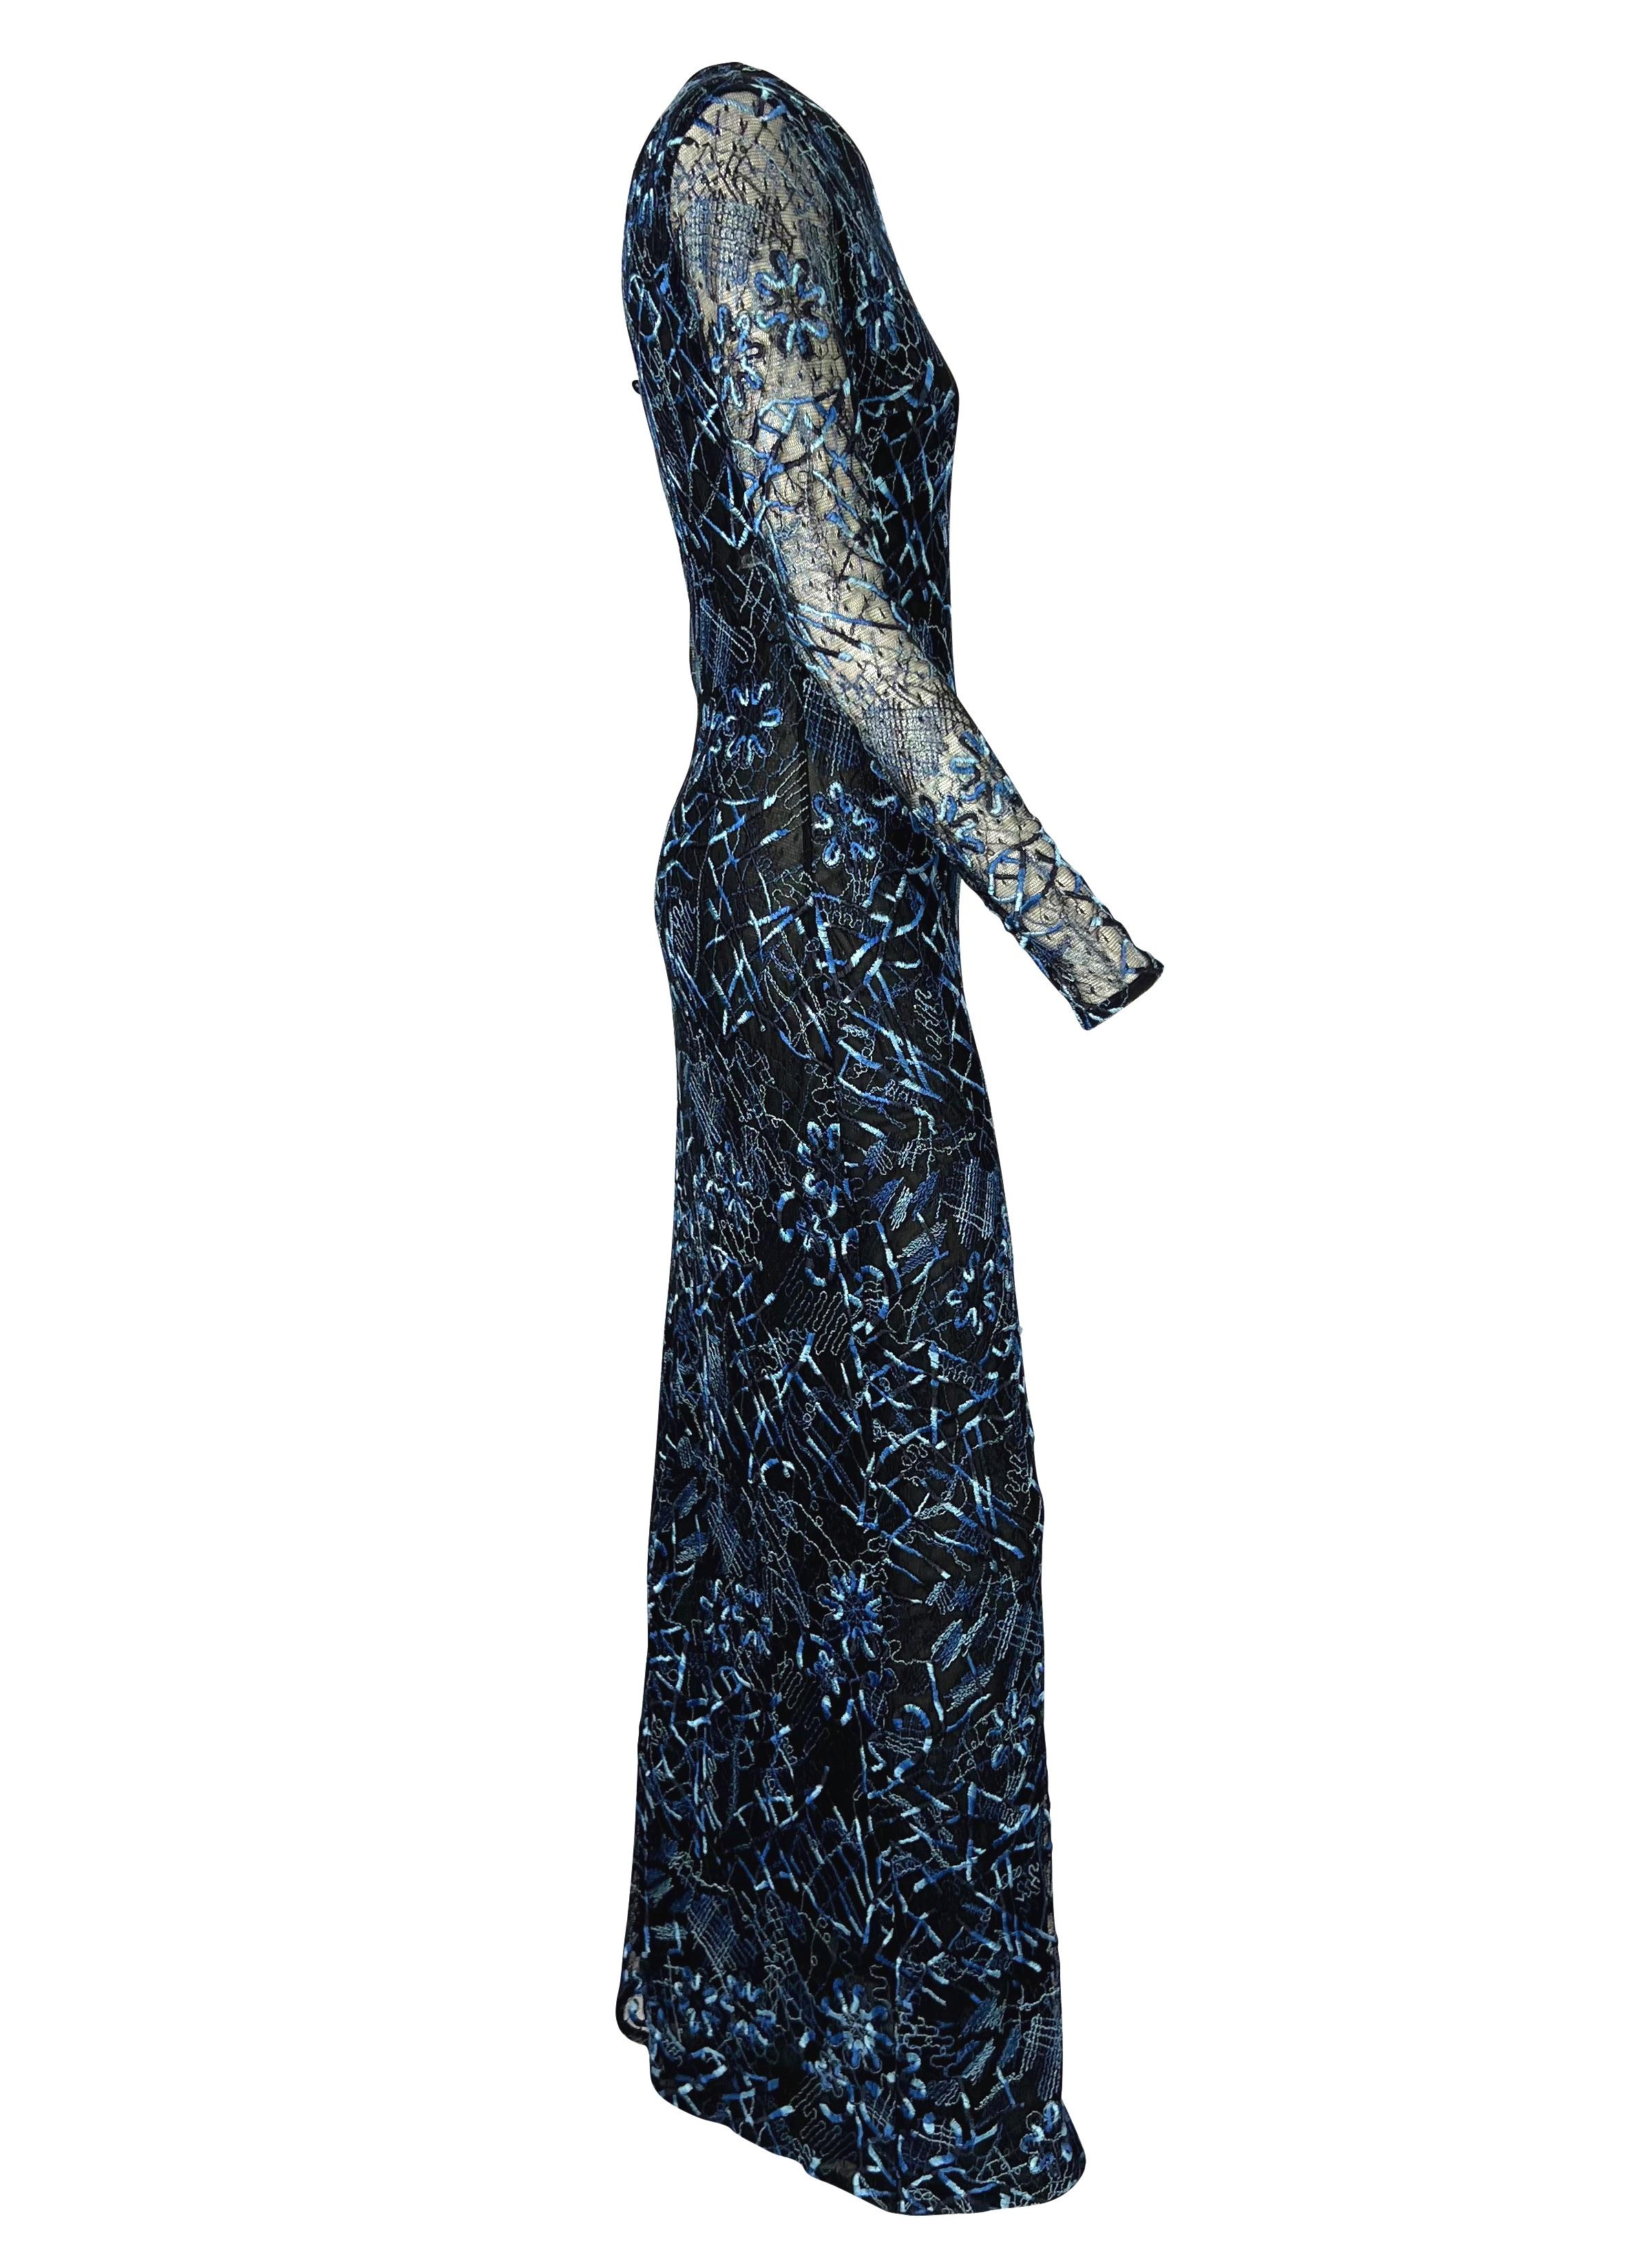 S/S 1998 Christian Lacroix Black Stretch Sheer Mesh Blue Embroidered Maxi Dress For Sale 4